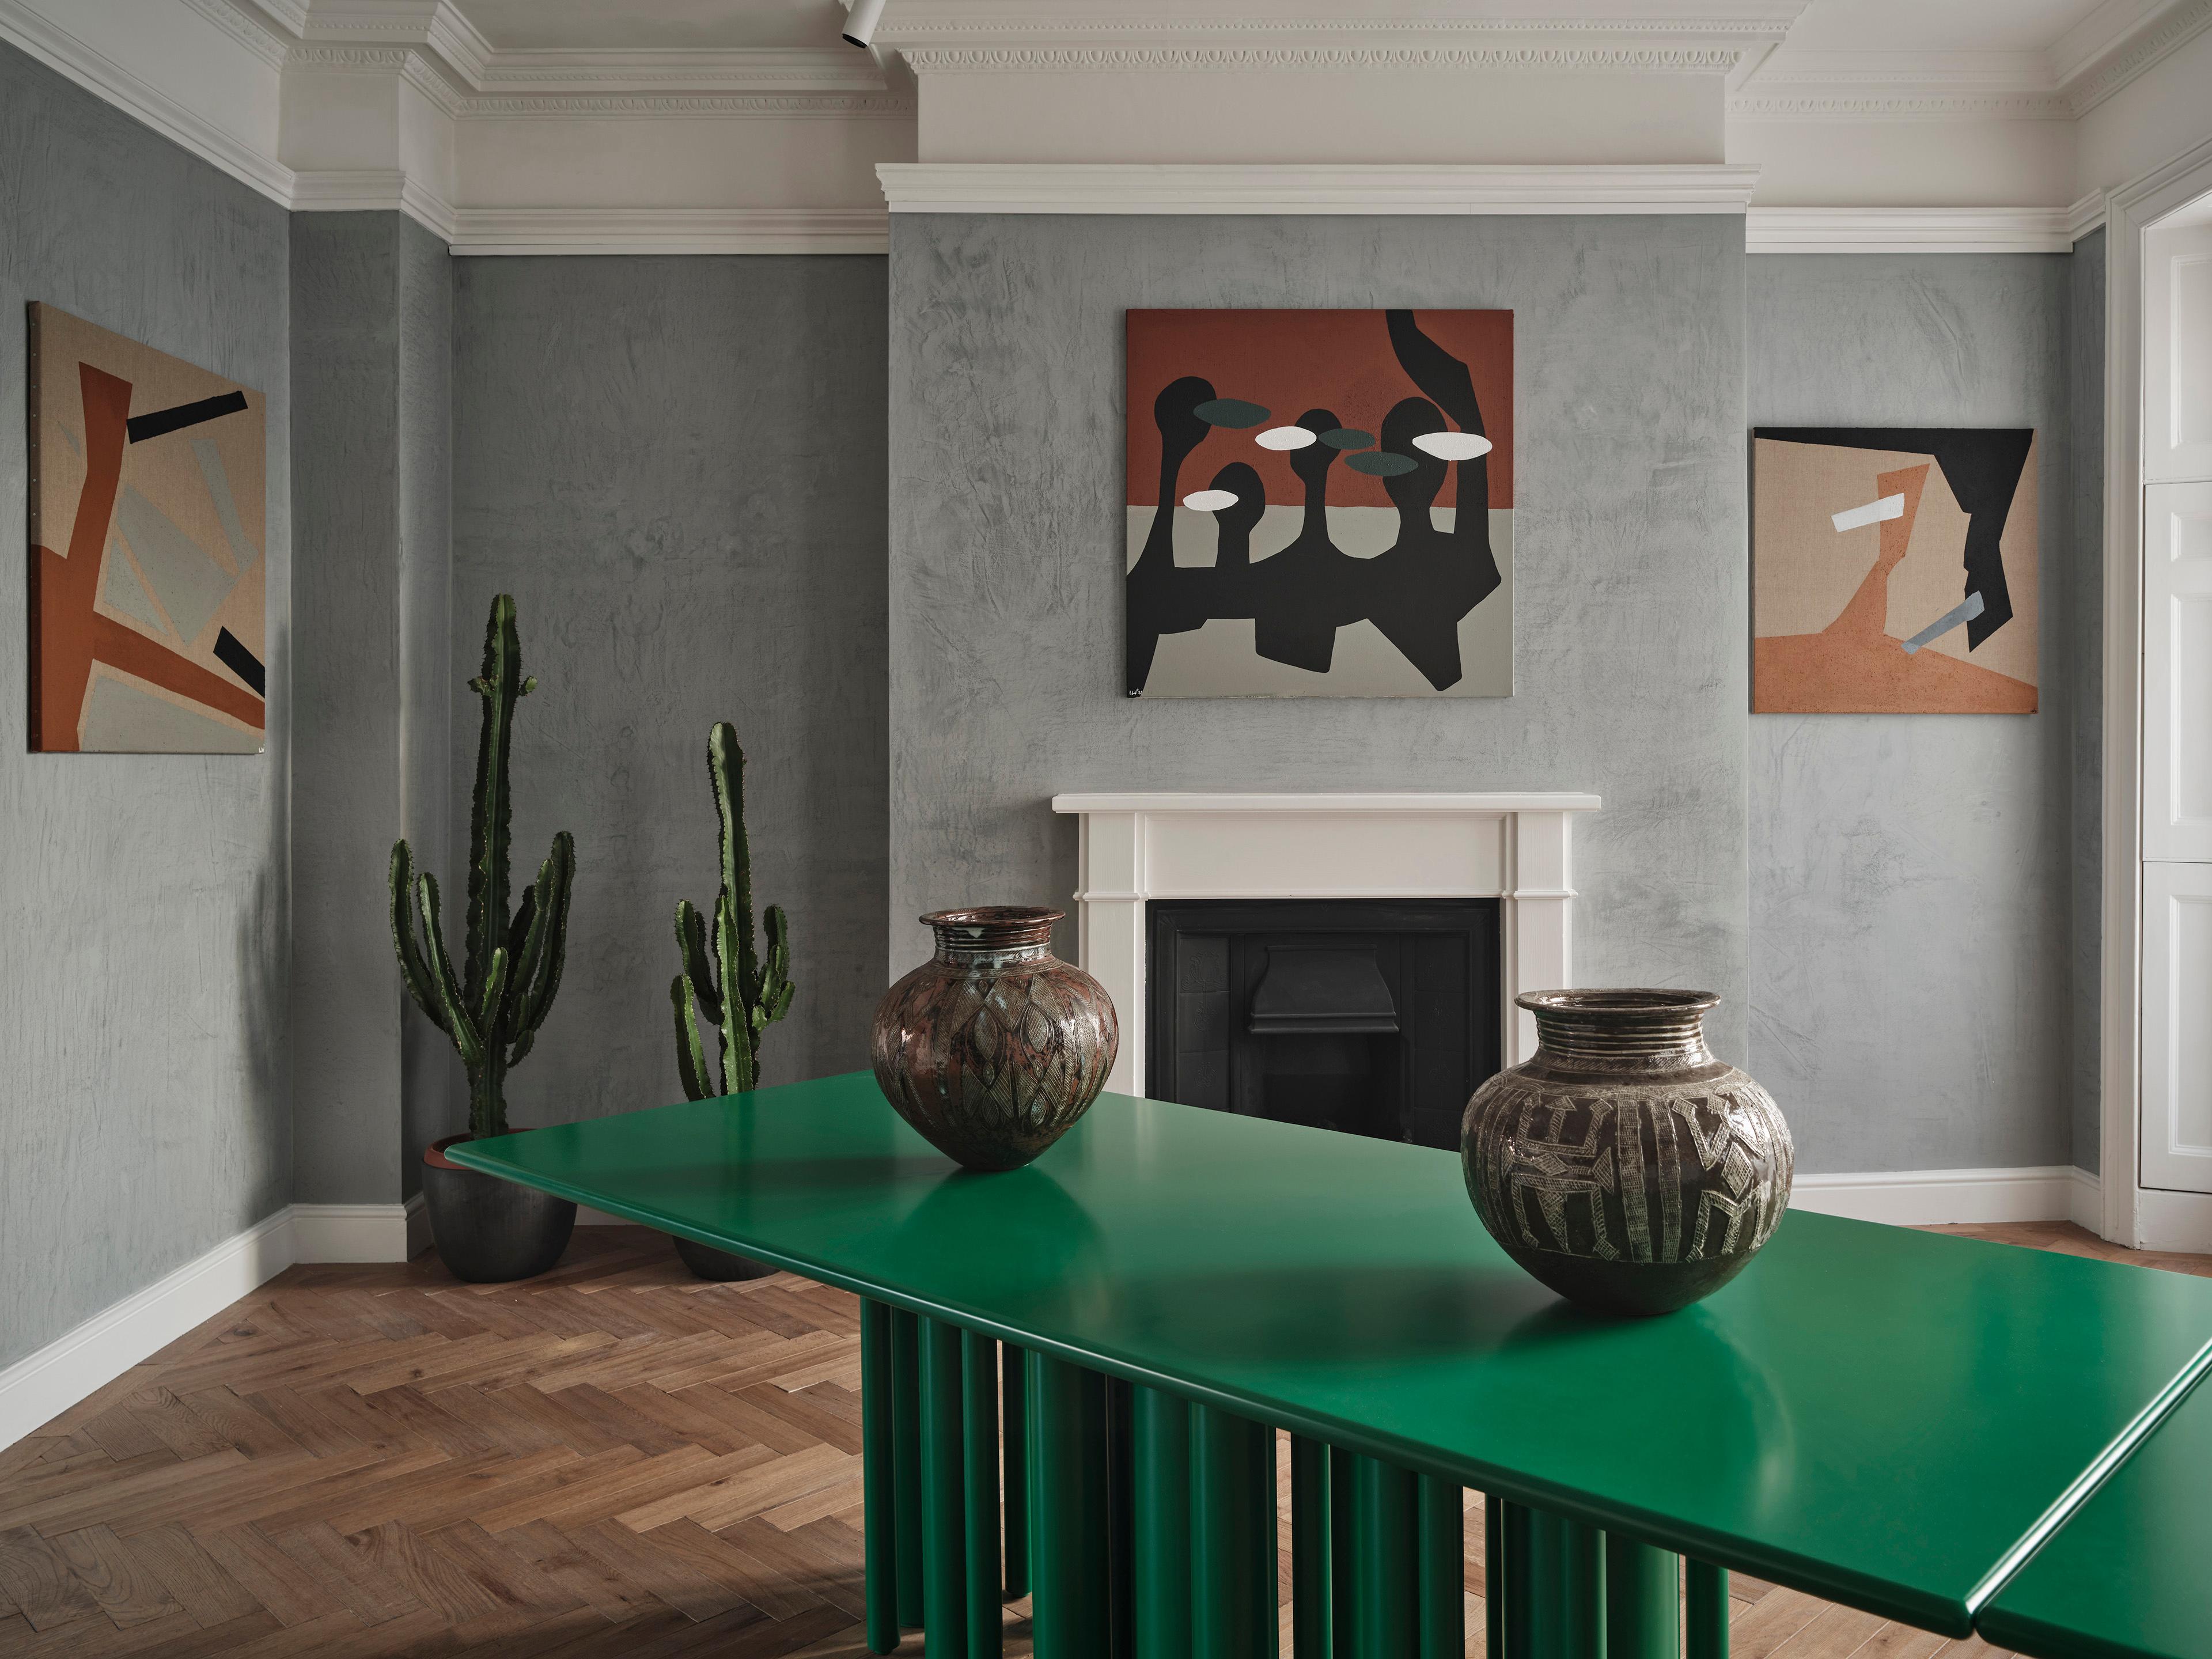 The Townhaus green contemporary table for SoShiro by Interni Design Studio makes for an eye-catching sculptural centerpiece for any dining room as well as for an office or boardroom. 

The lush green matte lacquer transforms the surface of the